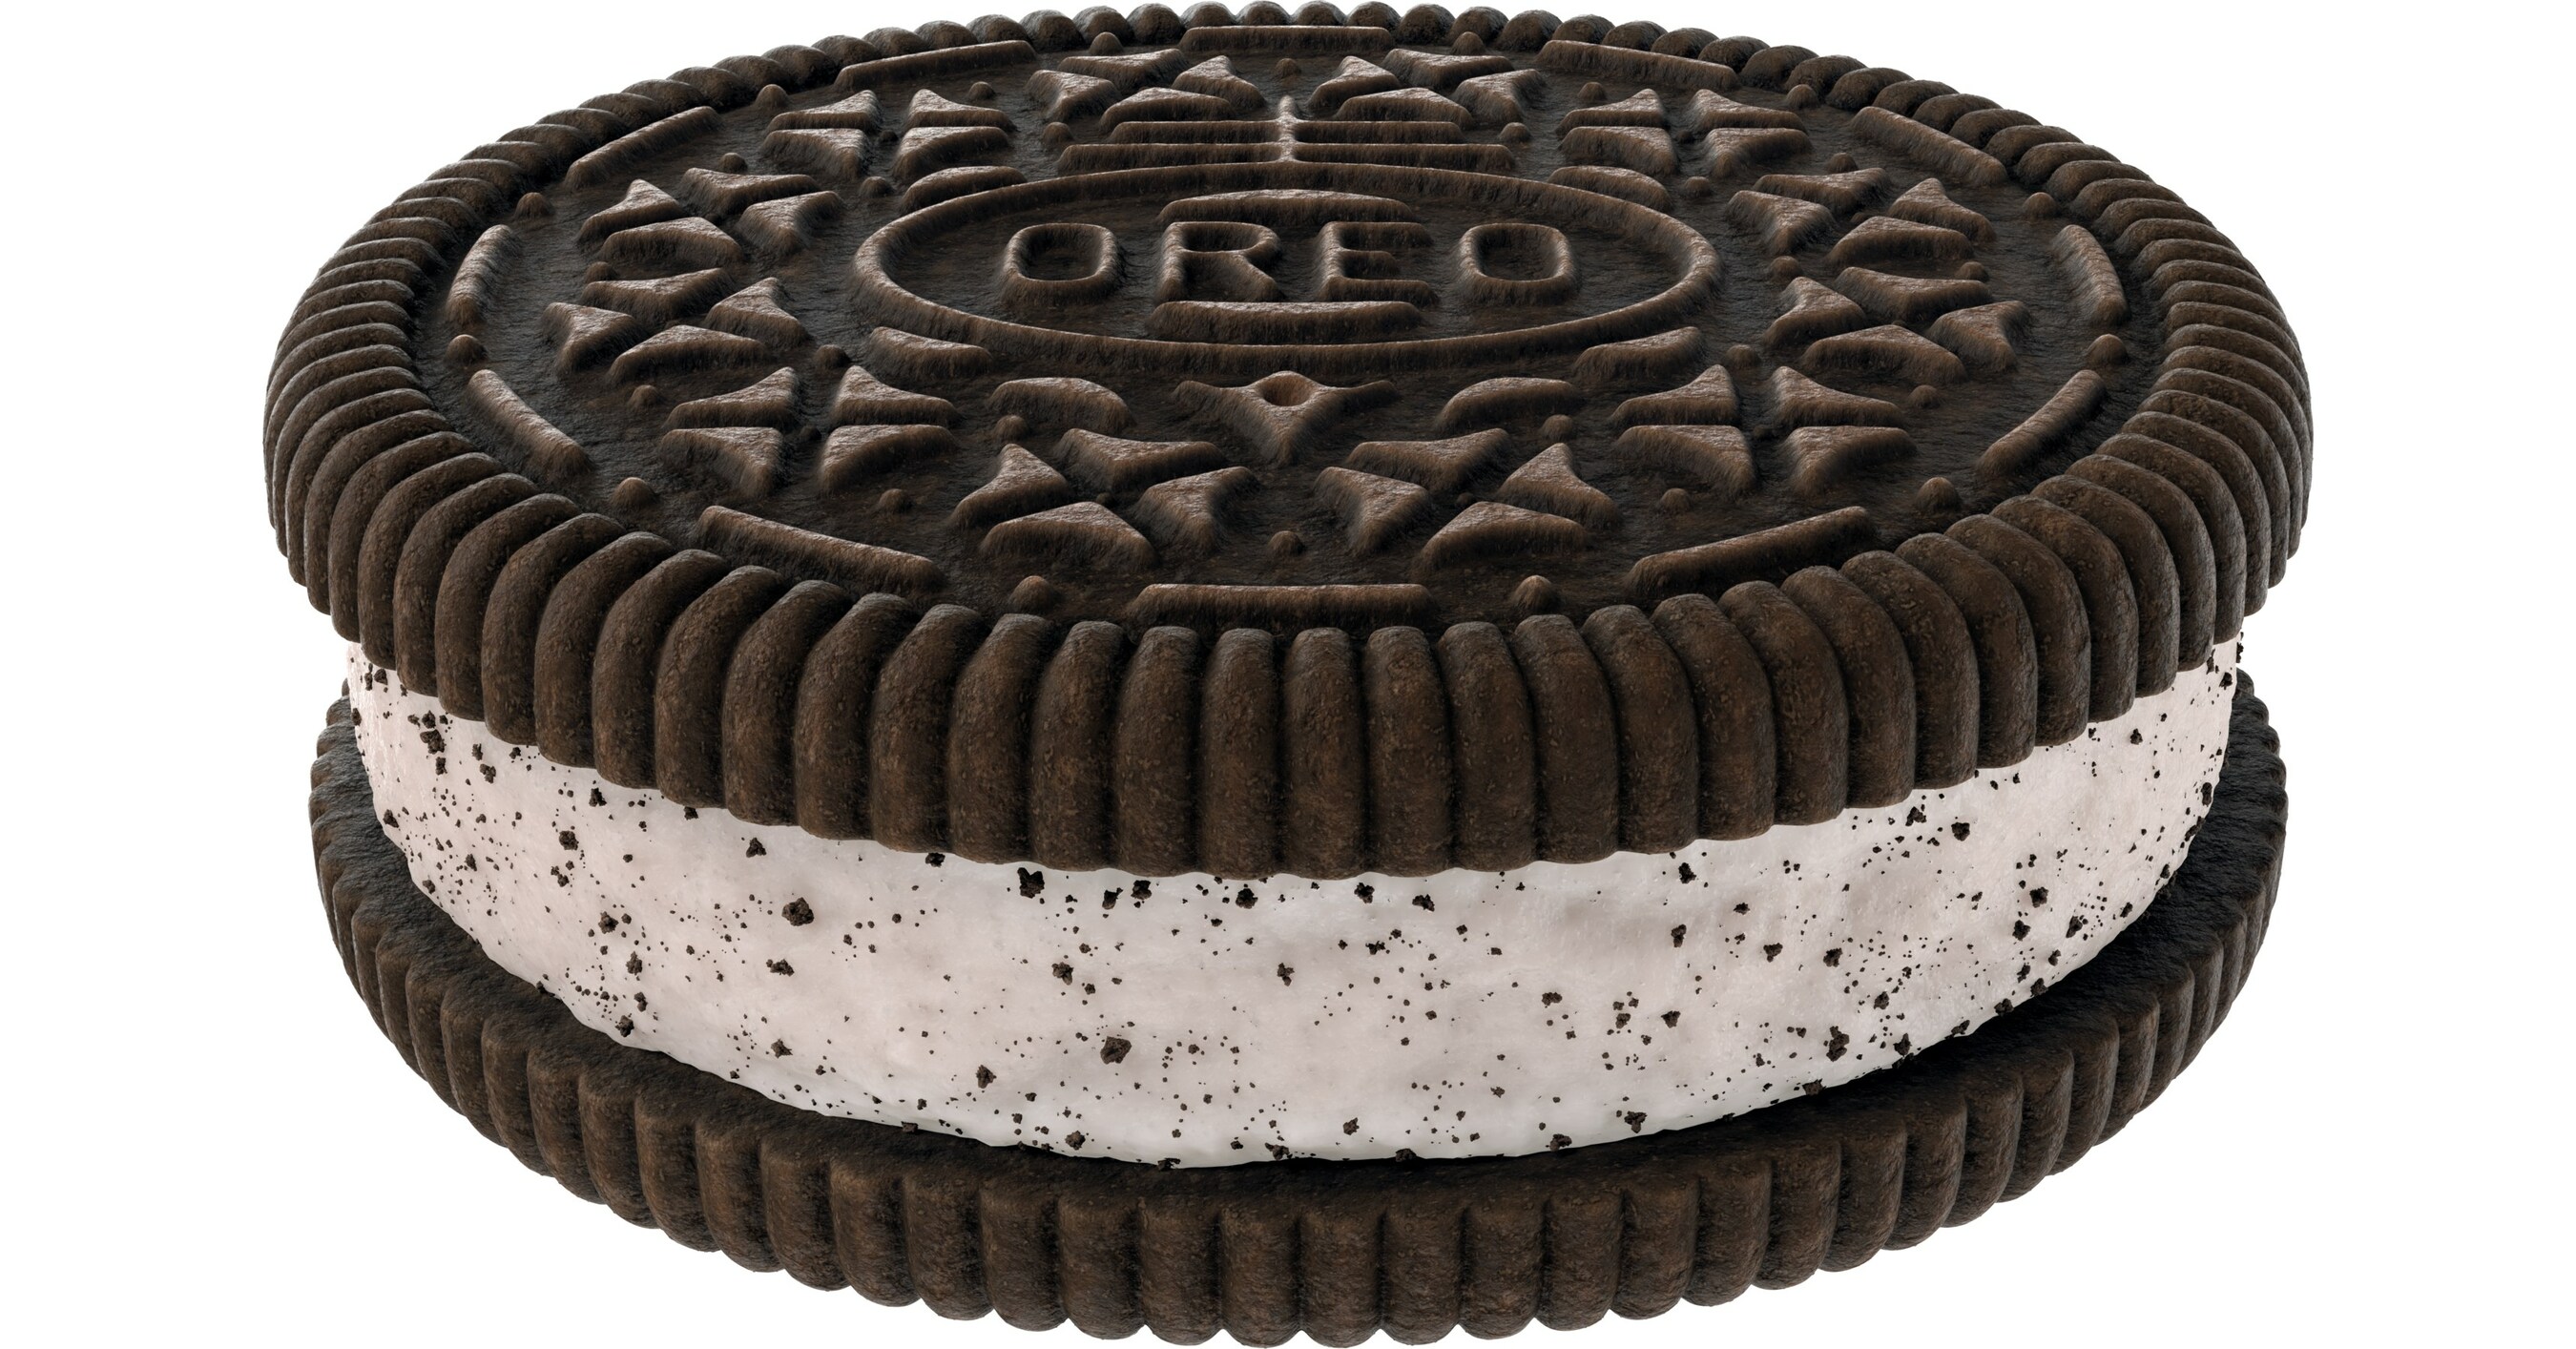 INCREDIBLE STUF AWAITS! THE MOST PLAYFUL OREO COOKIE TO DATE TWISTS OPEN  ITS MOST PLAYFUL WORLD EVER